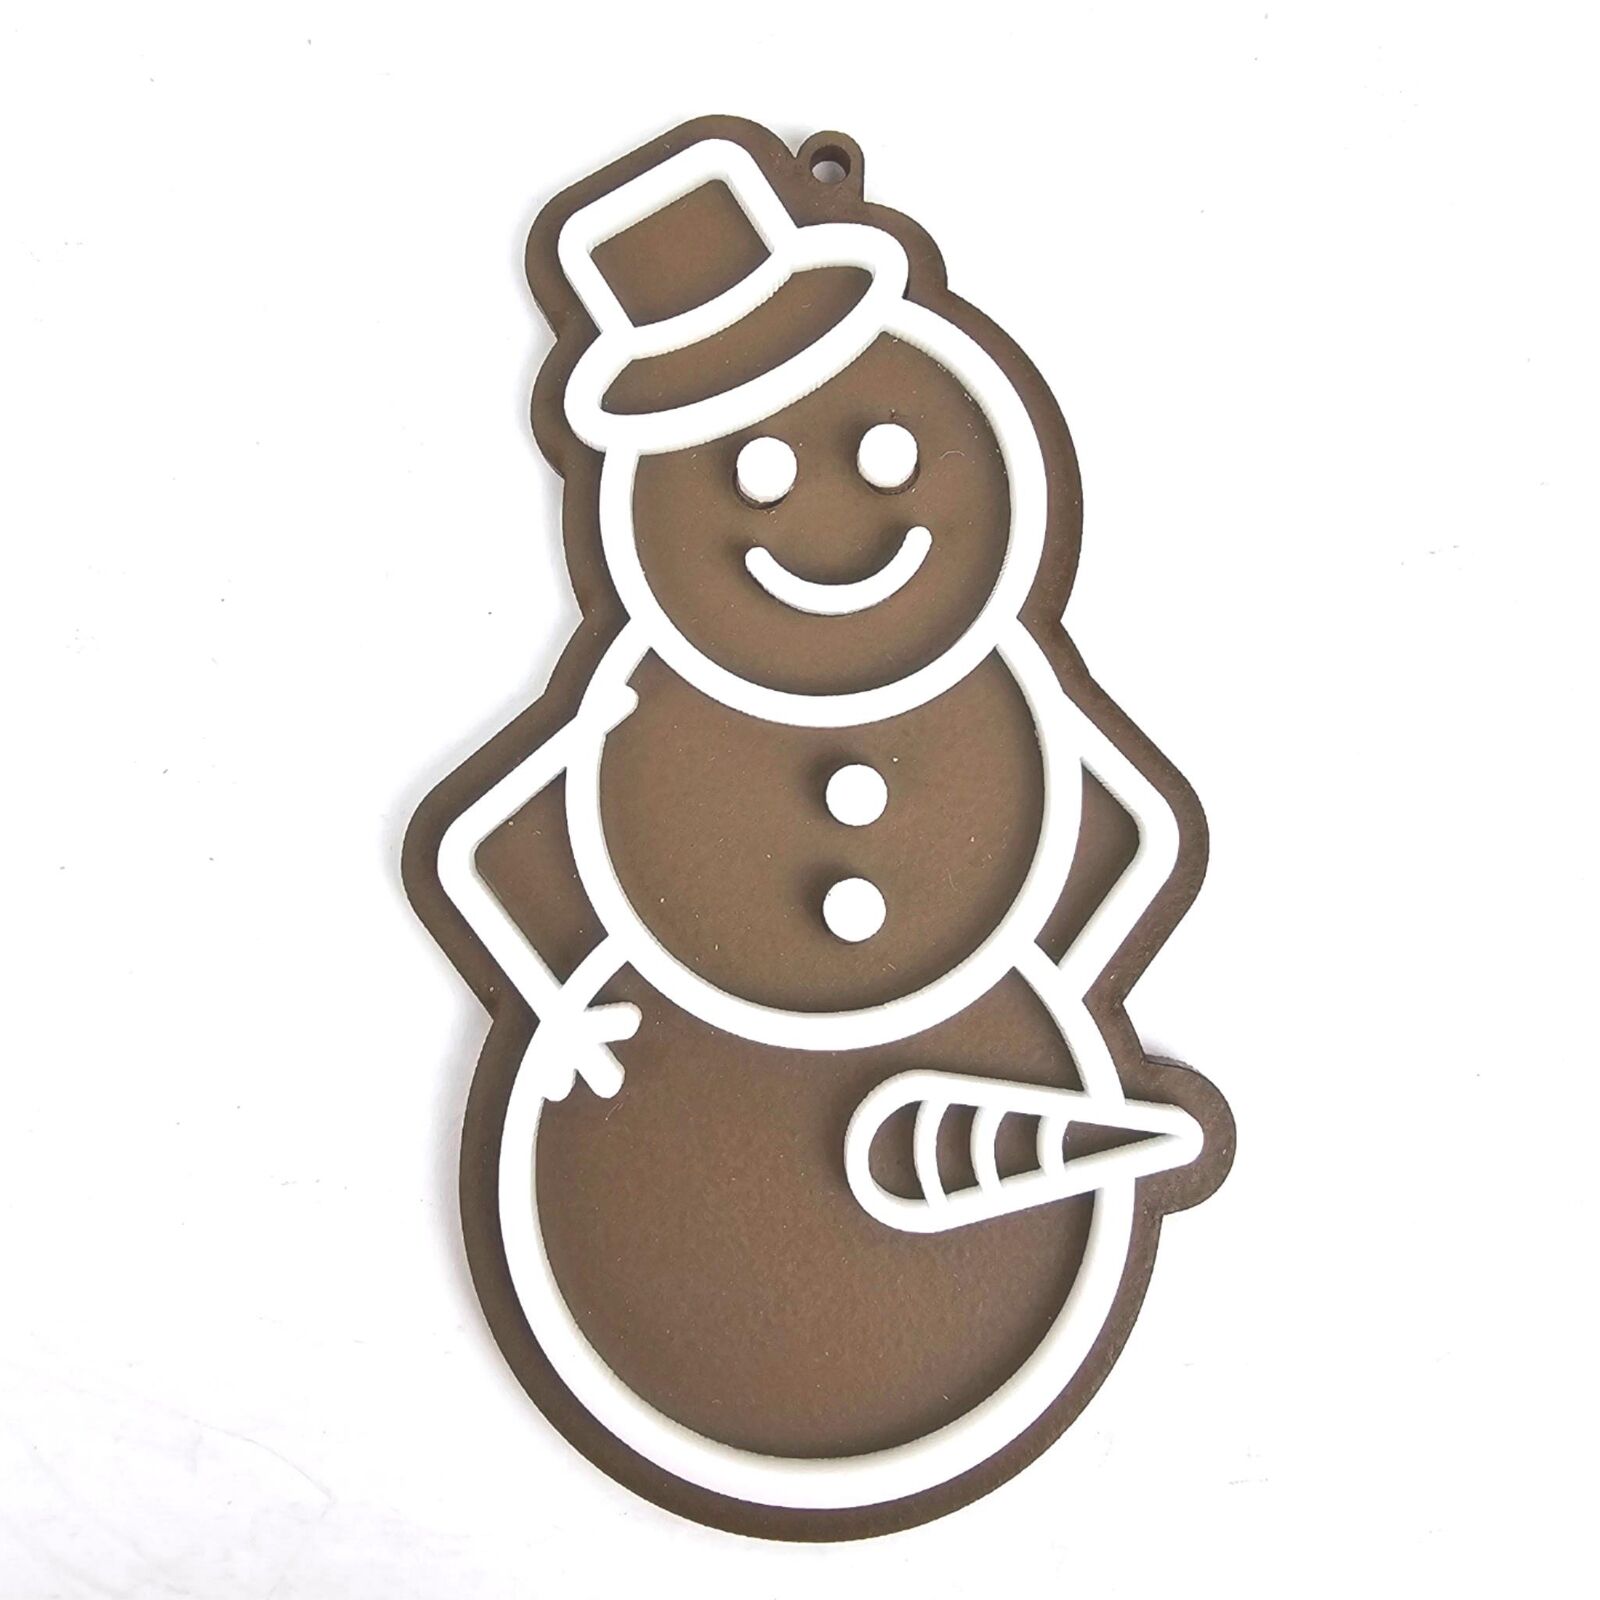 Naughty Gingerbread Cookie Christmas Ornament Adult Sexual Mr Frosty The Snowman